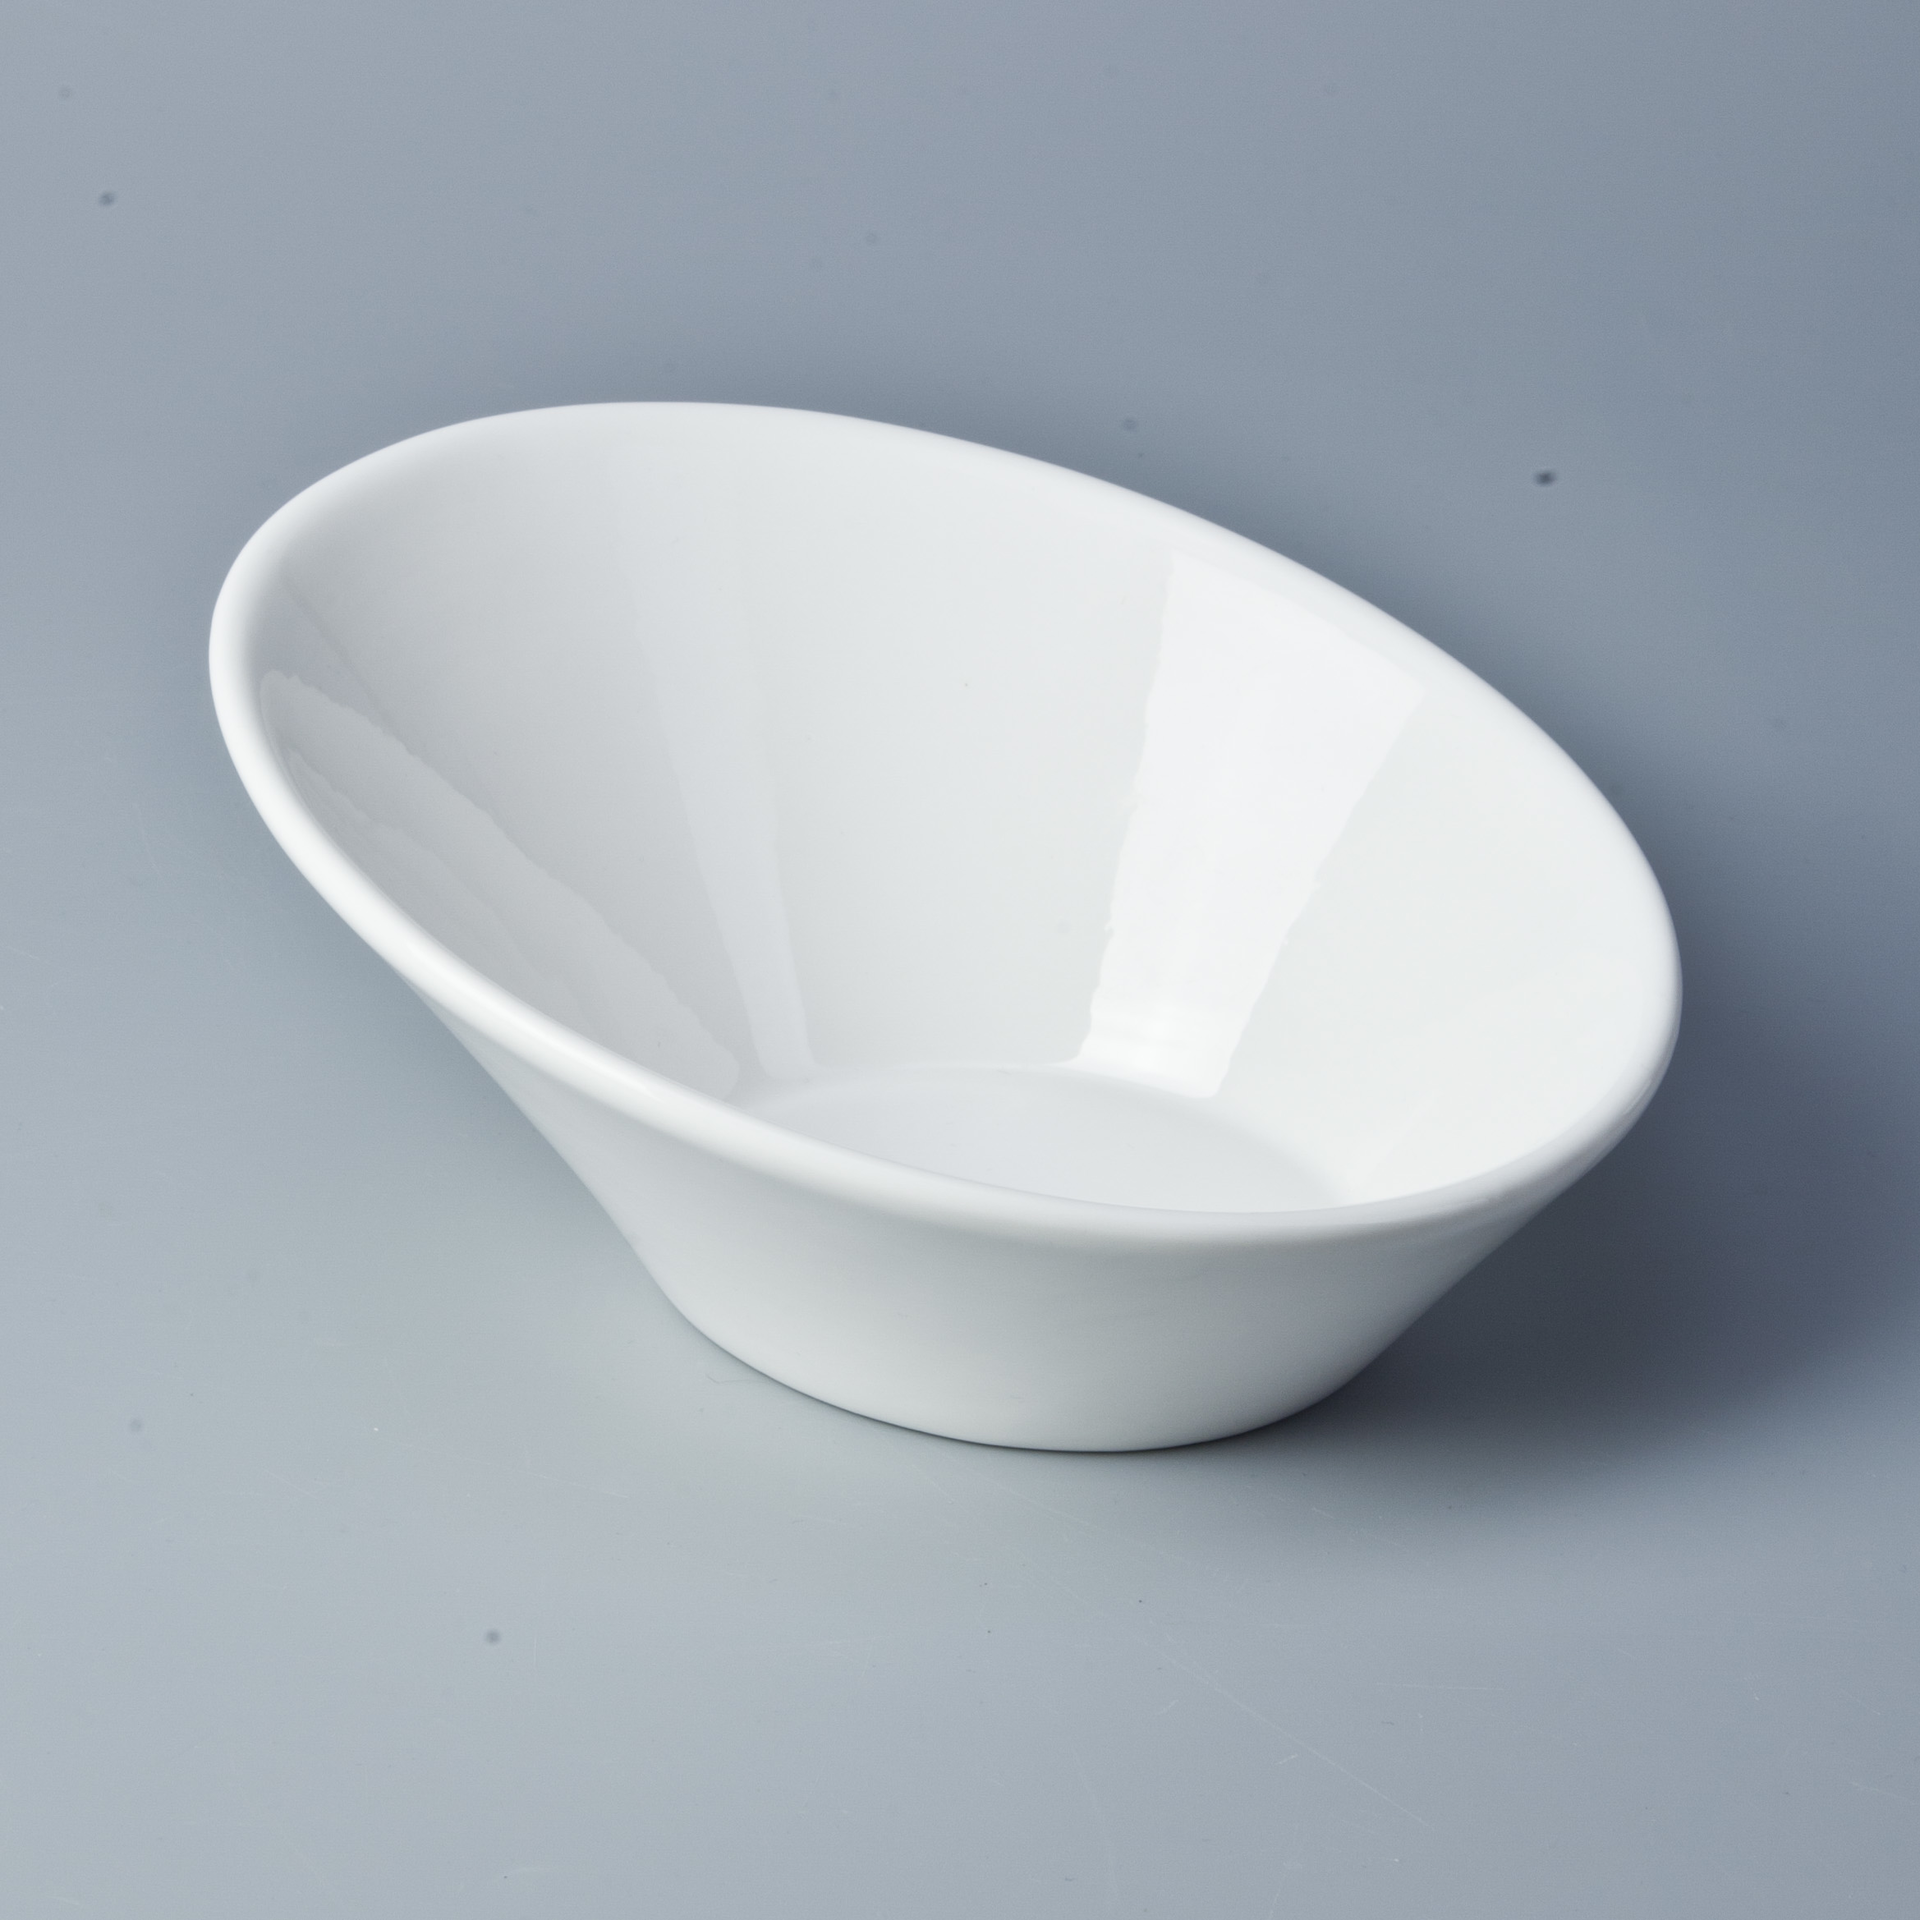 New china products for sale ceramic slanted white salad bowls